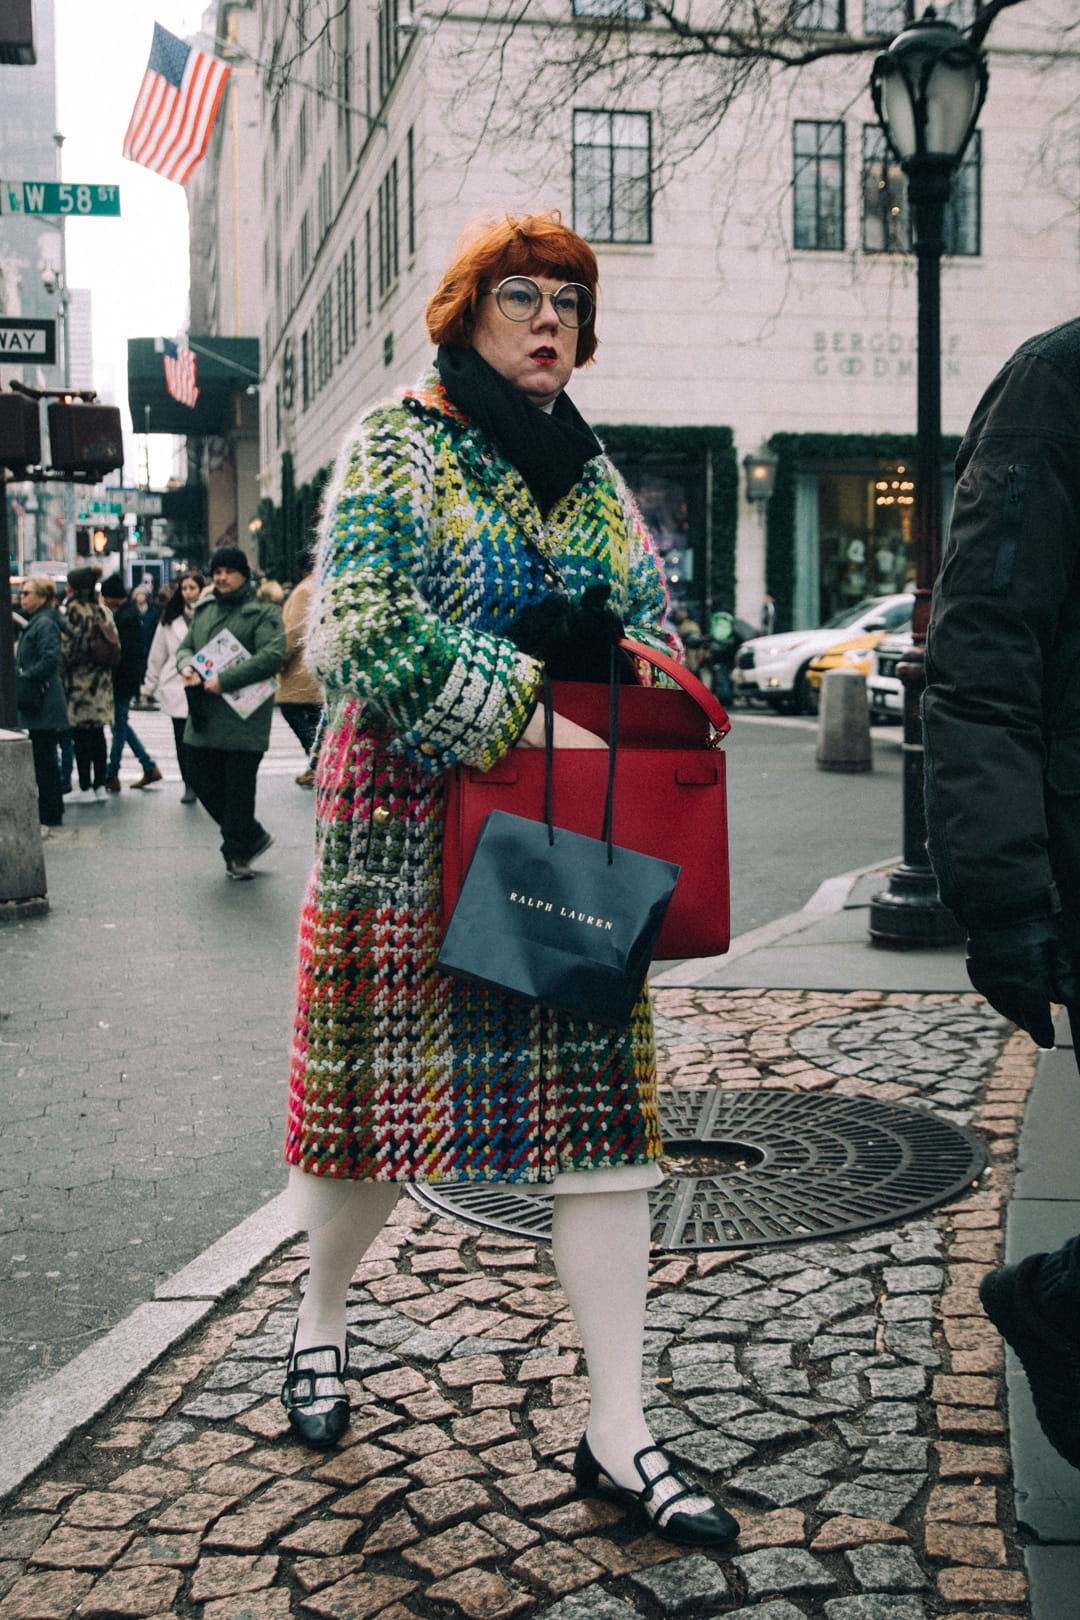 New Yorker, Street Photography by Ohad Kab